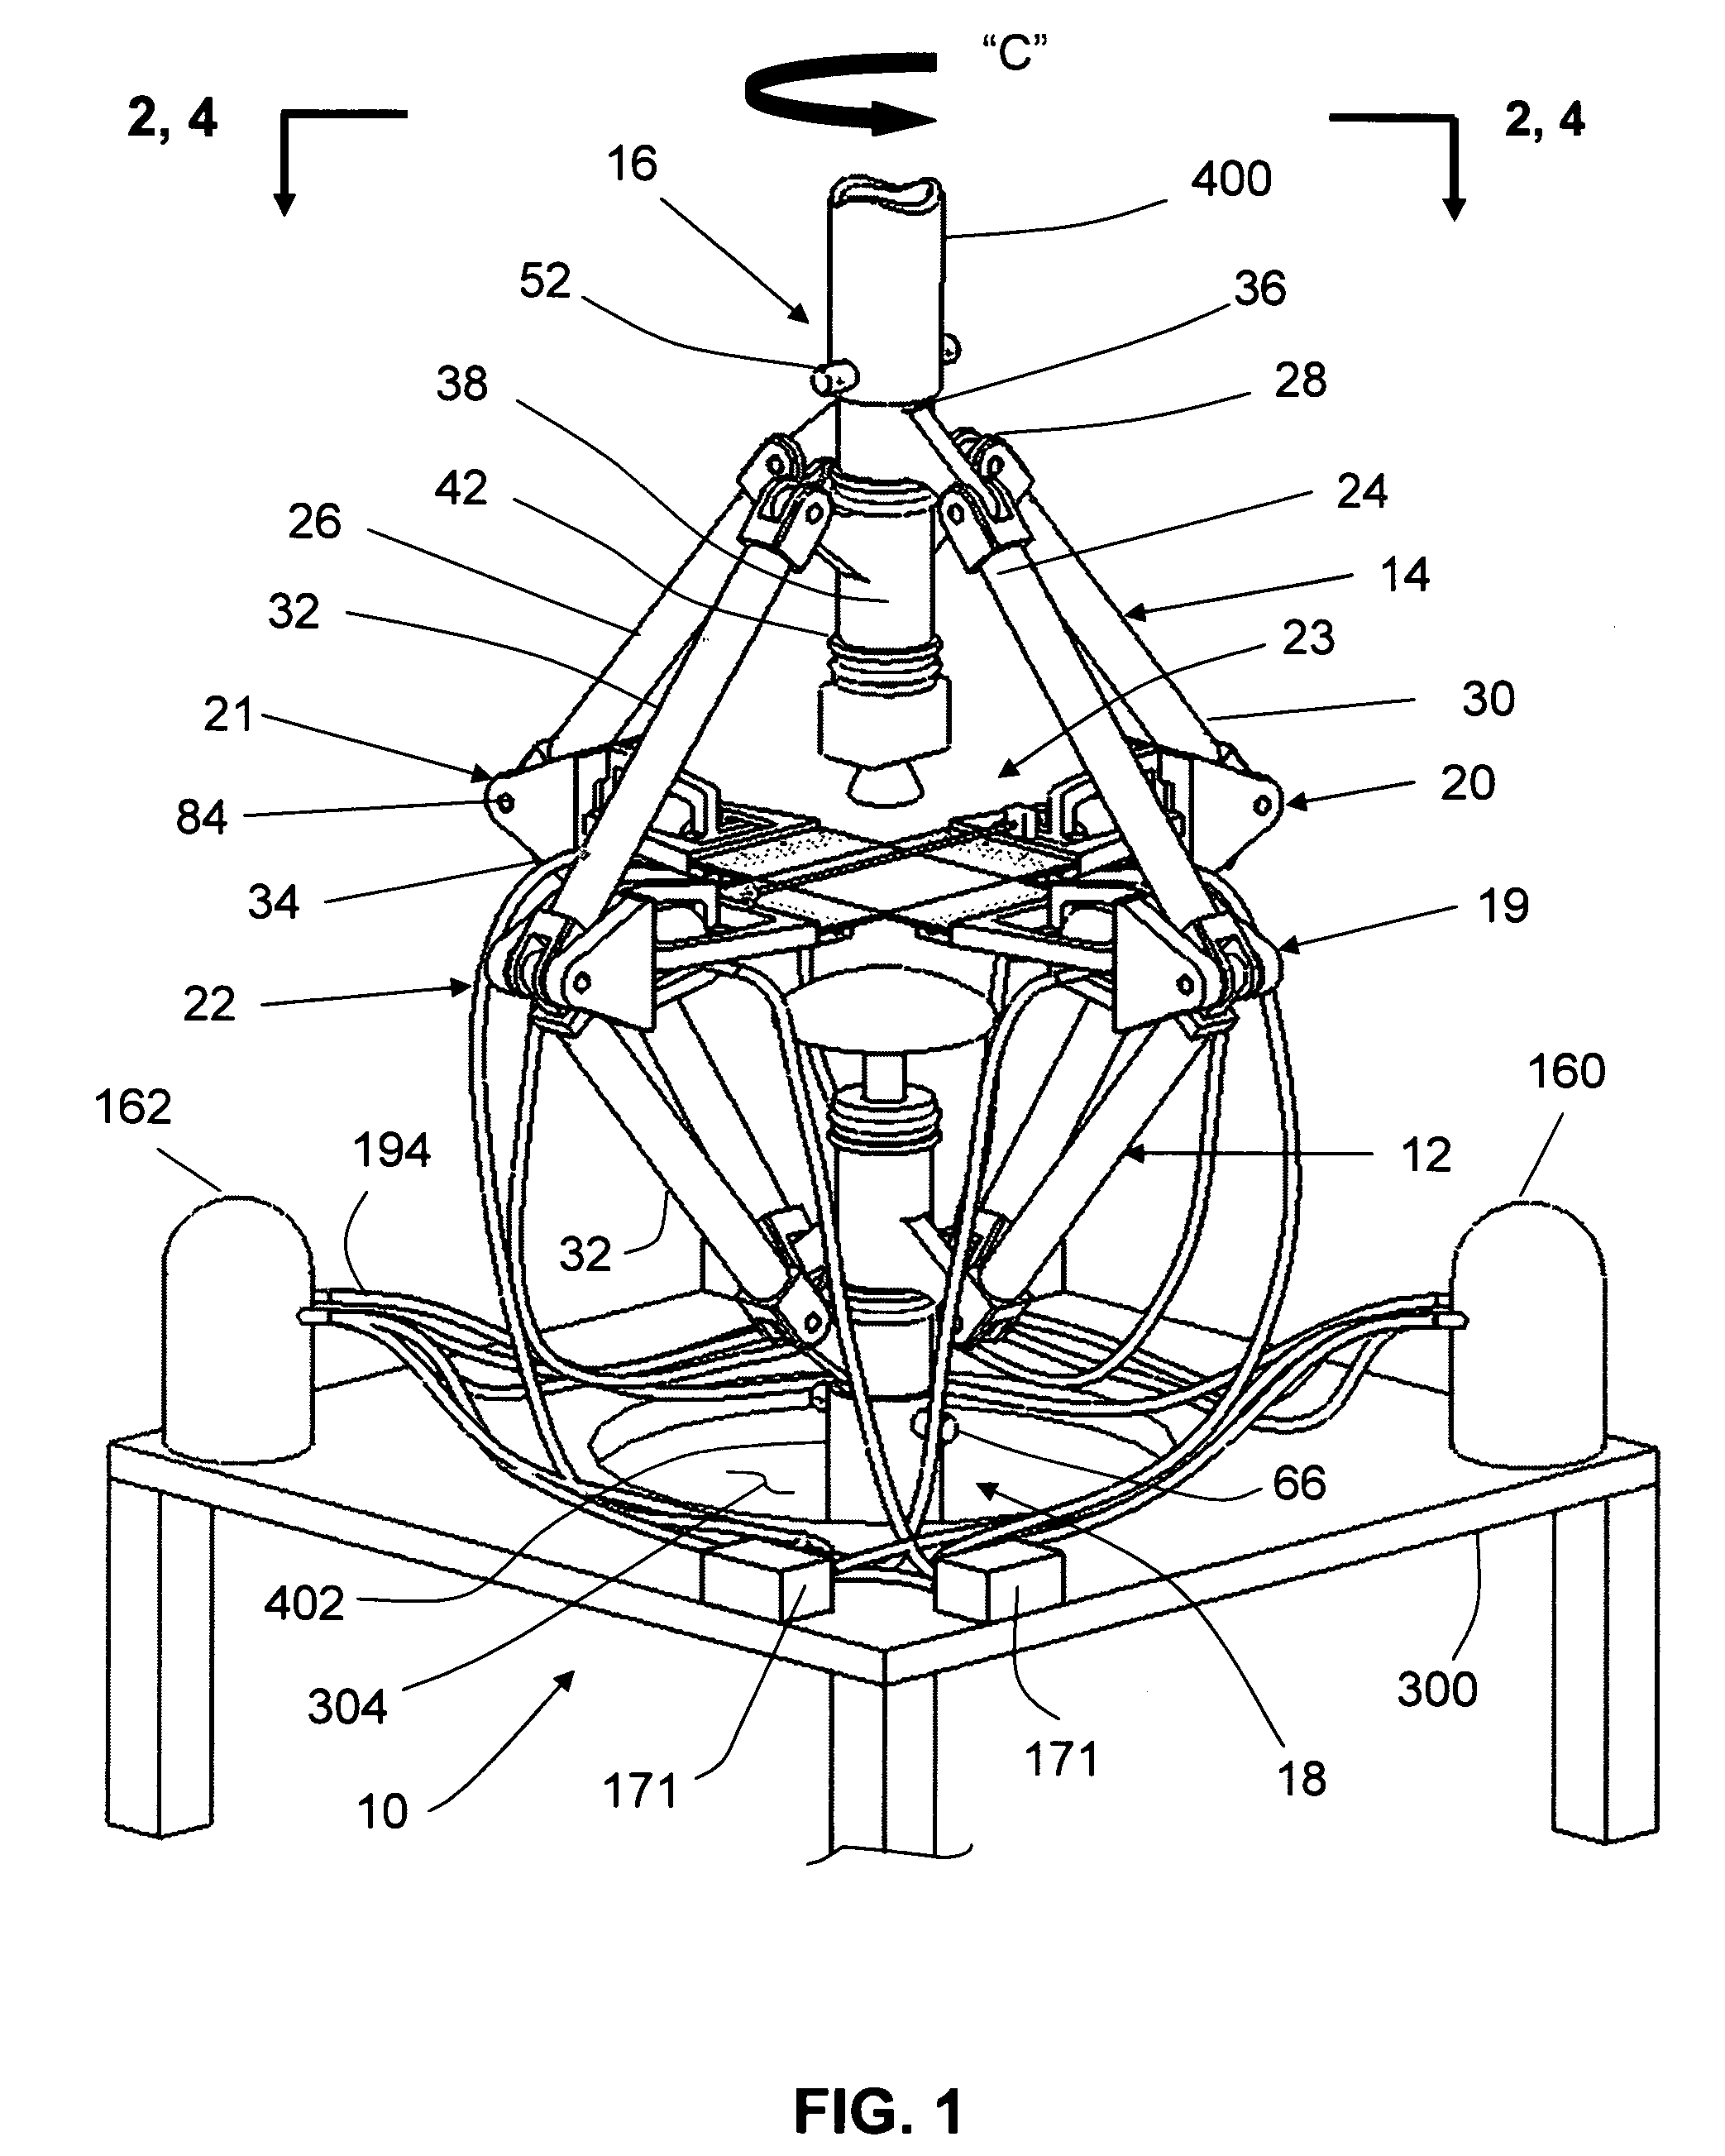 Biaxial and shear testing apparatus with force controls